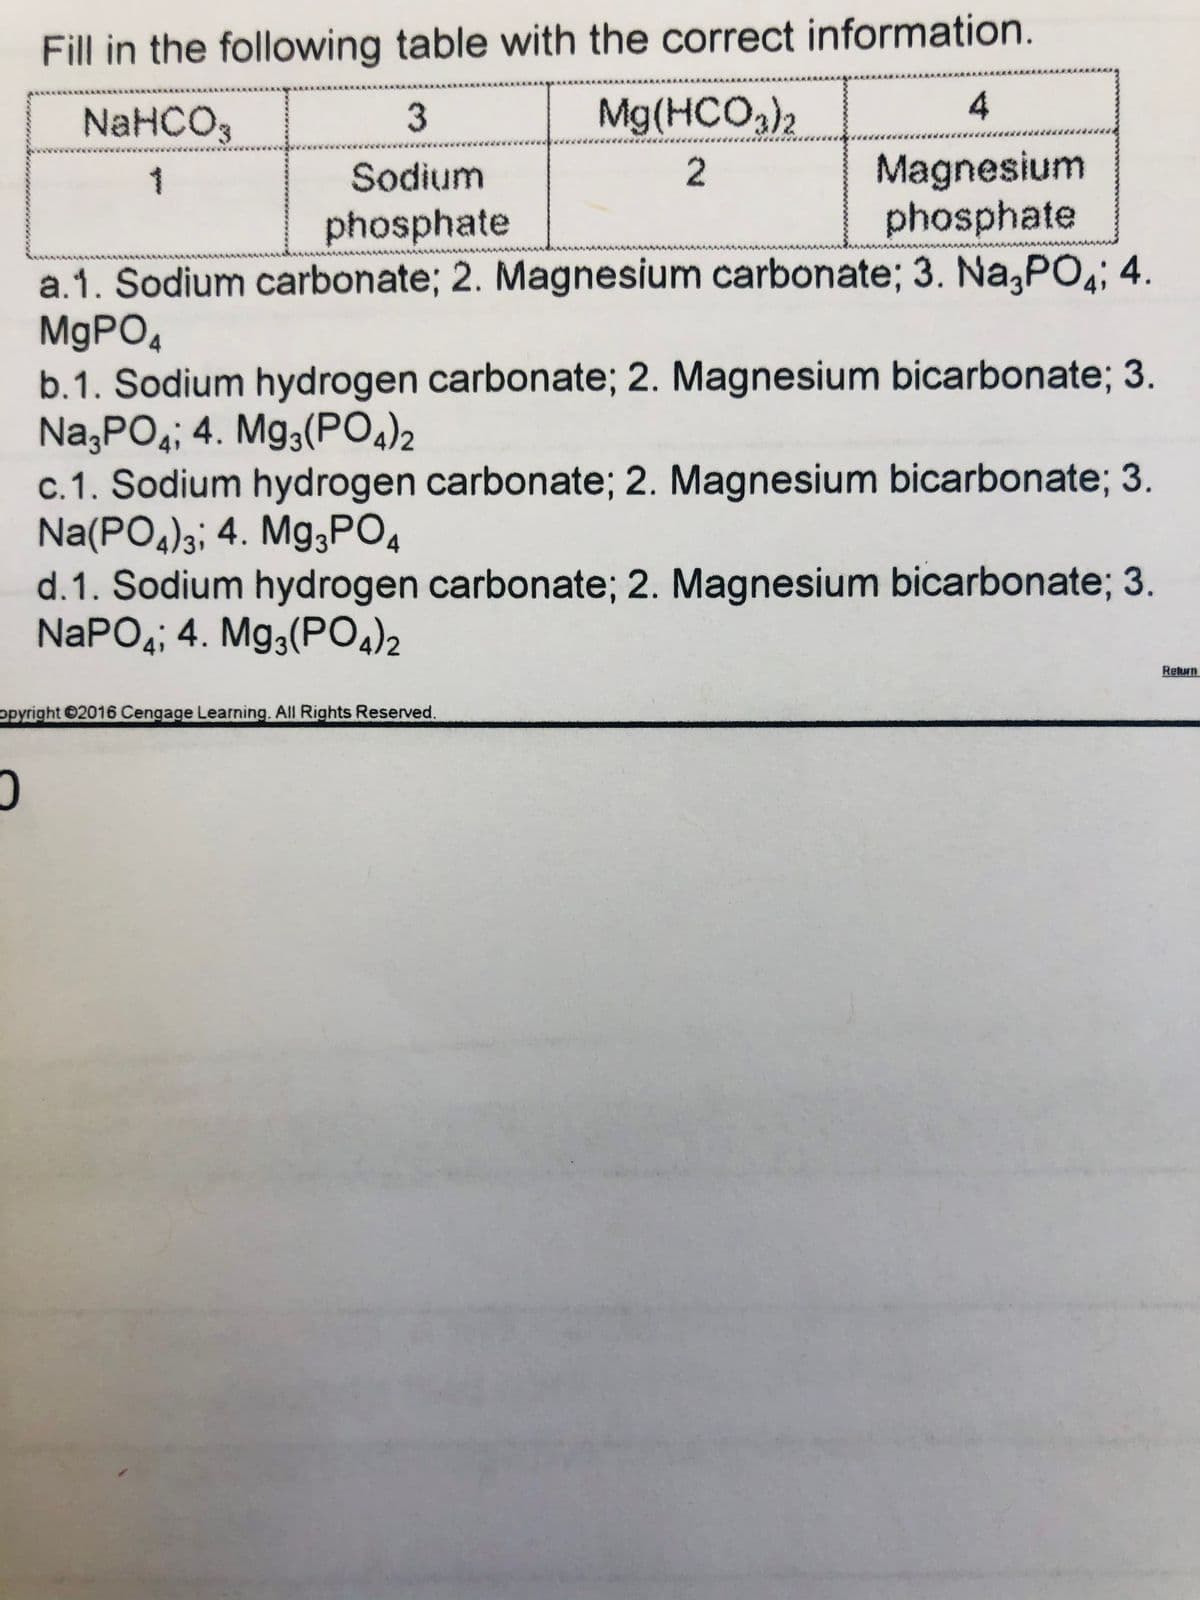 Fill in the following table with the correct information.
NaHCO,
3
Mg(HCO,)2
4
Magnesium
phosphate
Sodium
2
phosphate
a.1. Sodium carbonate; 2. Magnesium carbonate; 3. Na,PO,; 4.
M9PO4
b.1. Sodium hydrogen carbonate; 2. Magnesium bicarbonate; 3.
Na,PO4; 4. Mg3(PO,)2
c.1. Sodium hydrogen carbonate; 2. Magnesium bicarbonate; 3.
Na(PO4)3; 4. Mg;PO4
d.1. Sodium hydrogen carbonate; 2. Magnesium bicarbonate; 3.
NAPO4; 4. Mg3(PO4)2
Return
opyright 2016 Cengage Learning. All Rights Reserved.
